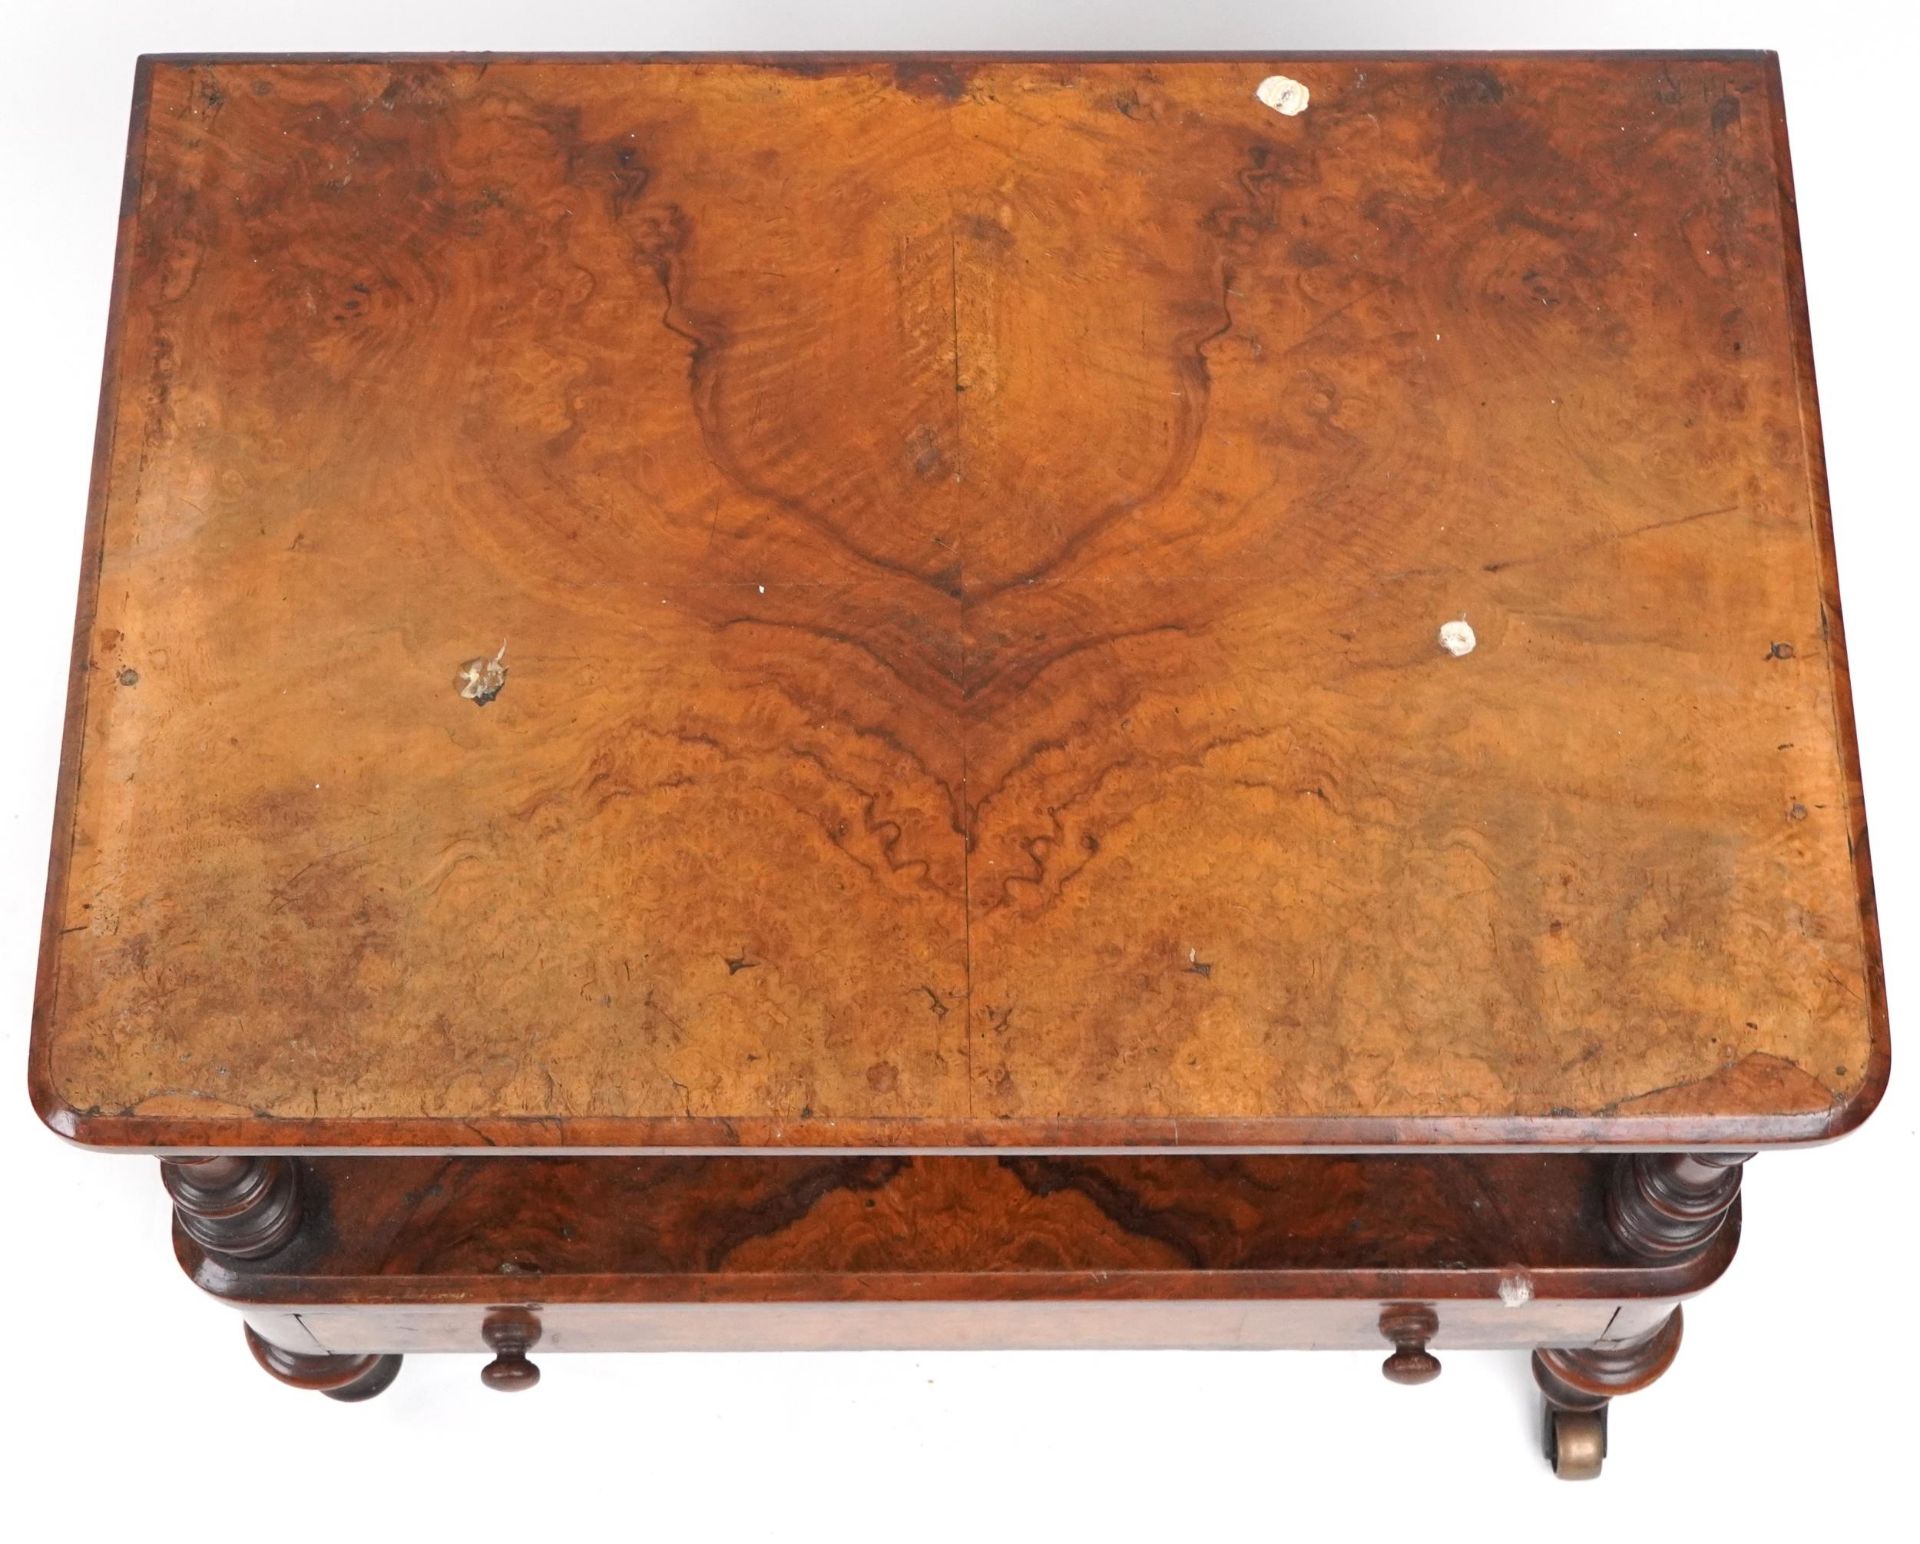 Victorian burr walnut two tier stand with frieze drawer and turned supports, 50cm H x 59cm W x - Image 3 of 4